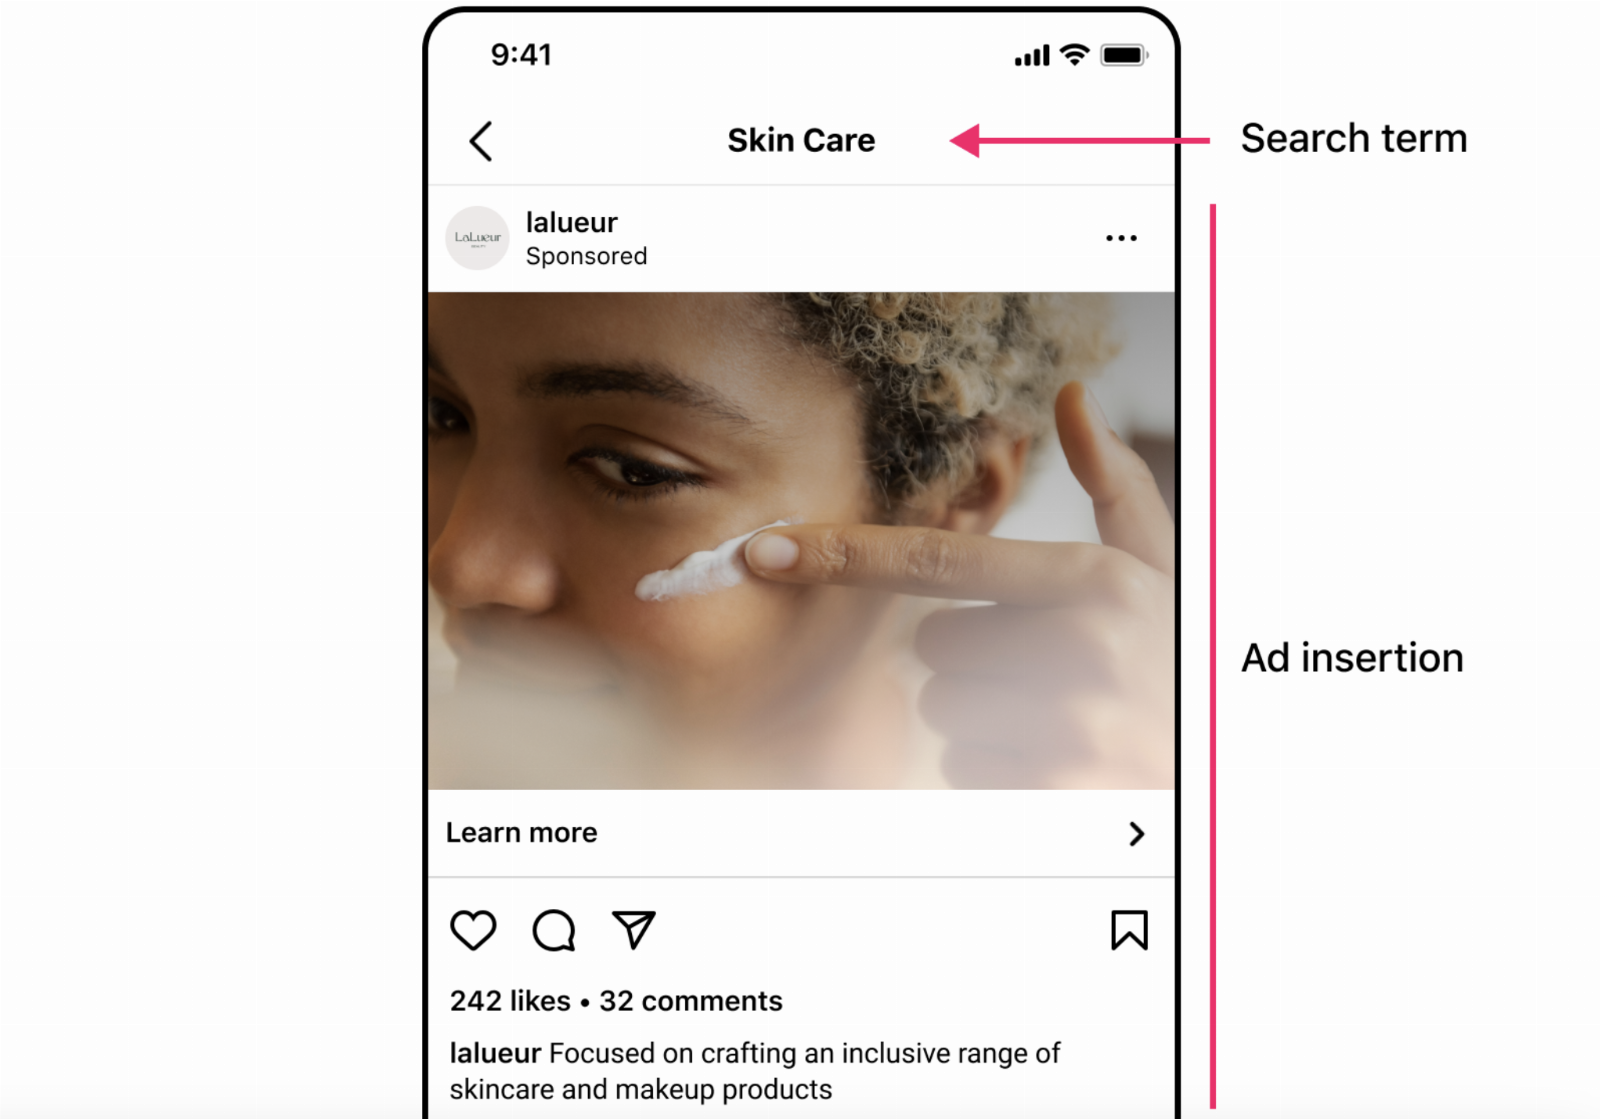 Instagram now allows for ads in search results via its Marketing API